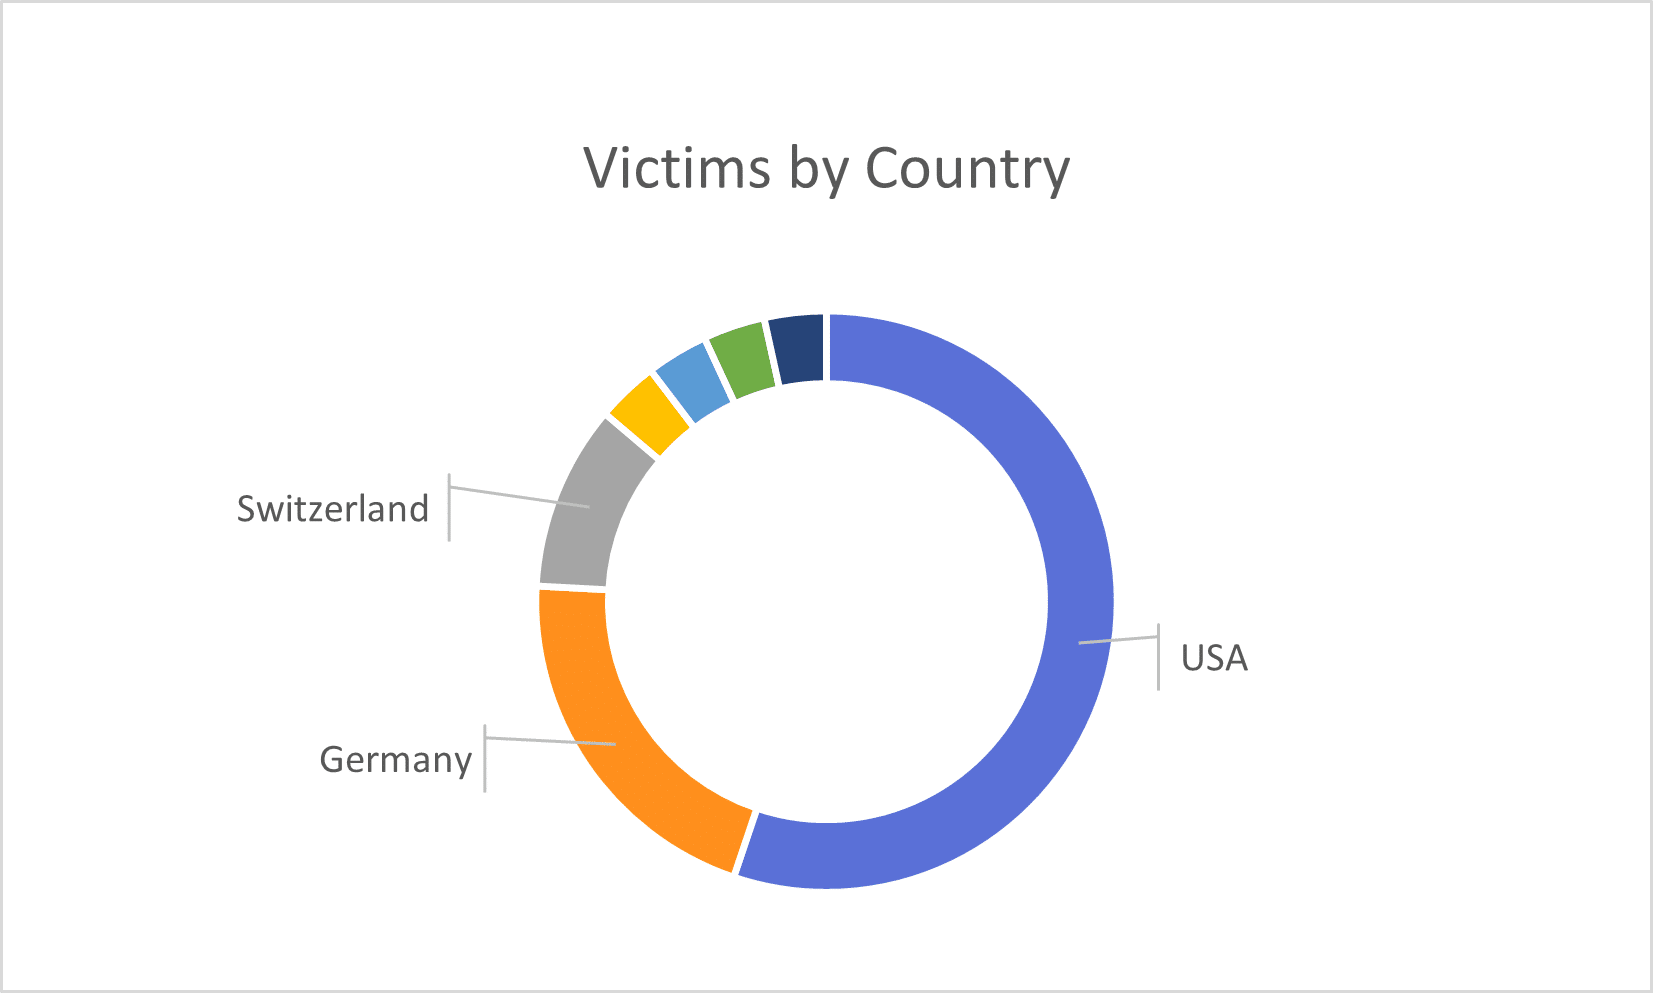 Black Basta victims distribution by country